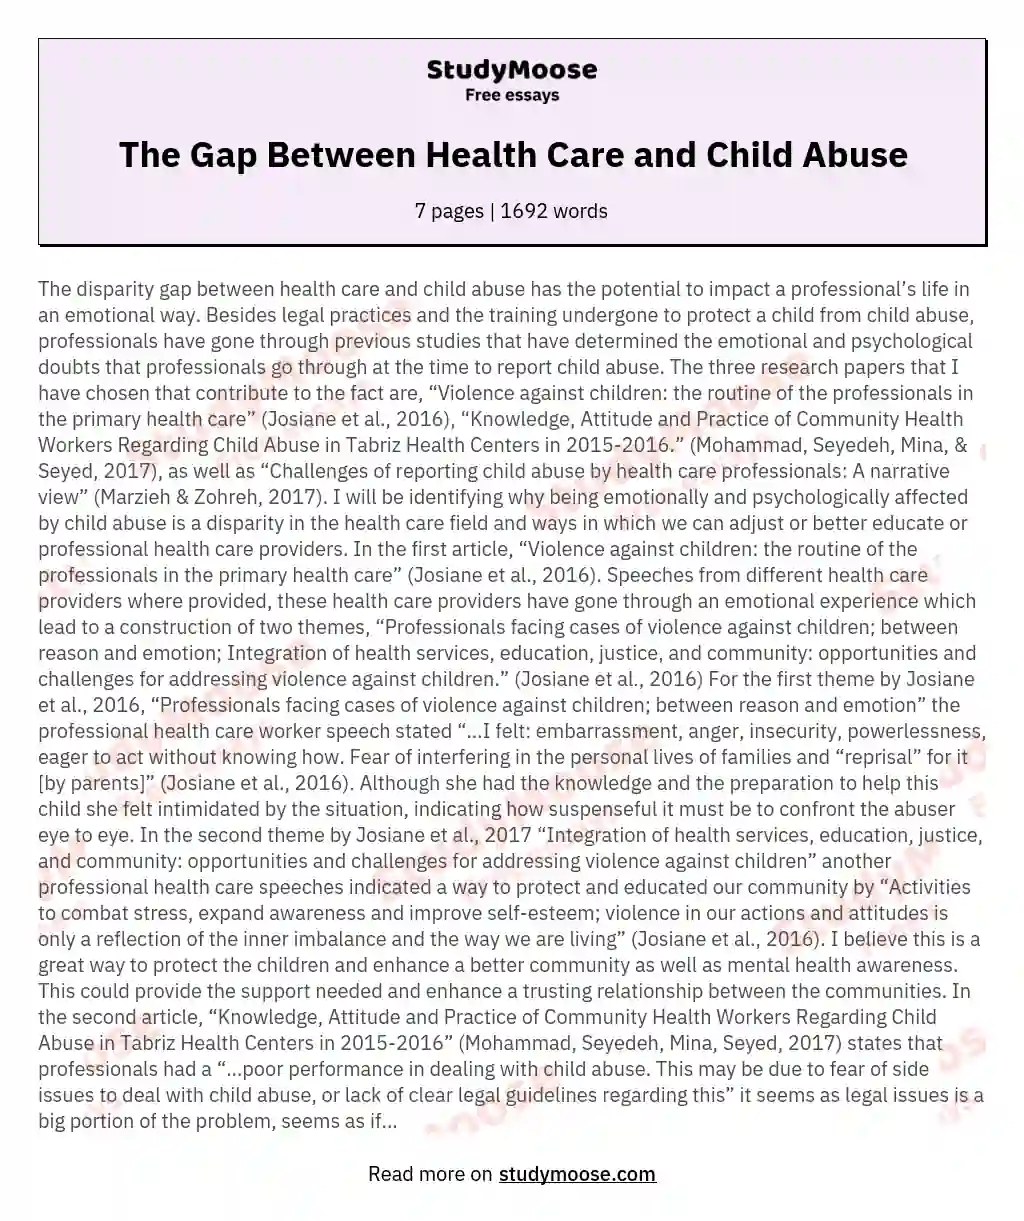 The Gap Between Health Care and Child Abuse essay